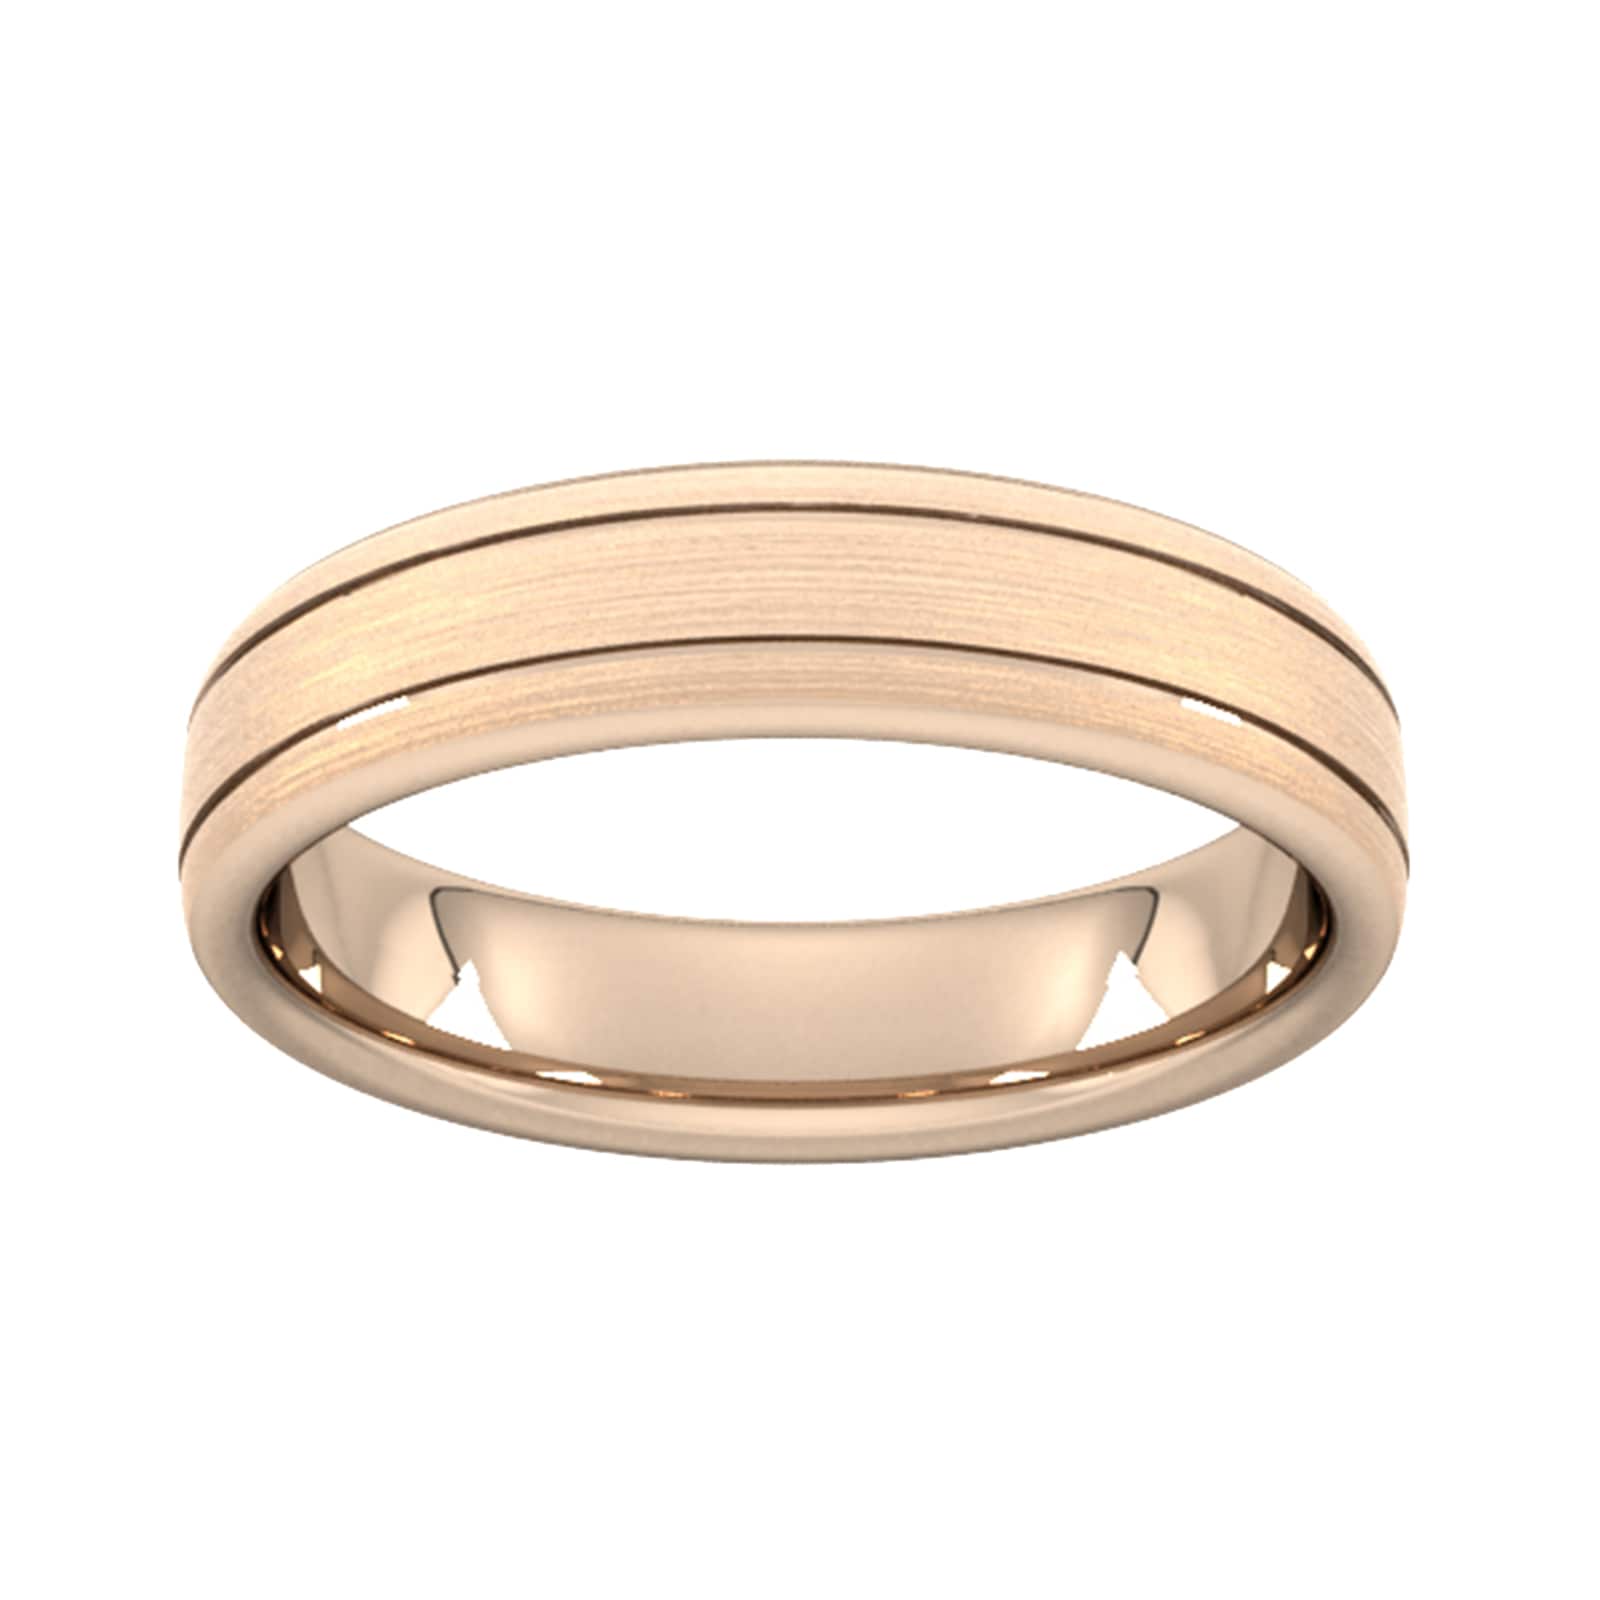 5mm Slight Court Standard Matt Finish With Double Grooves Wedding Ring In 18 Carat Rose Gold - Ring Size K